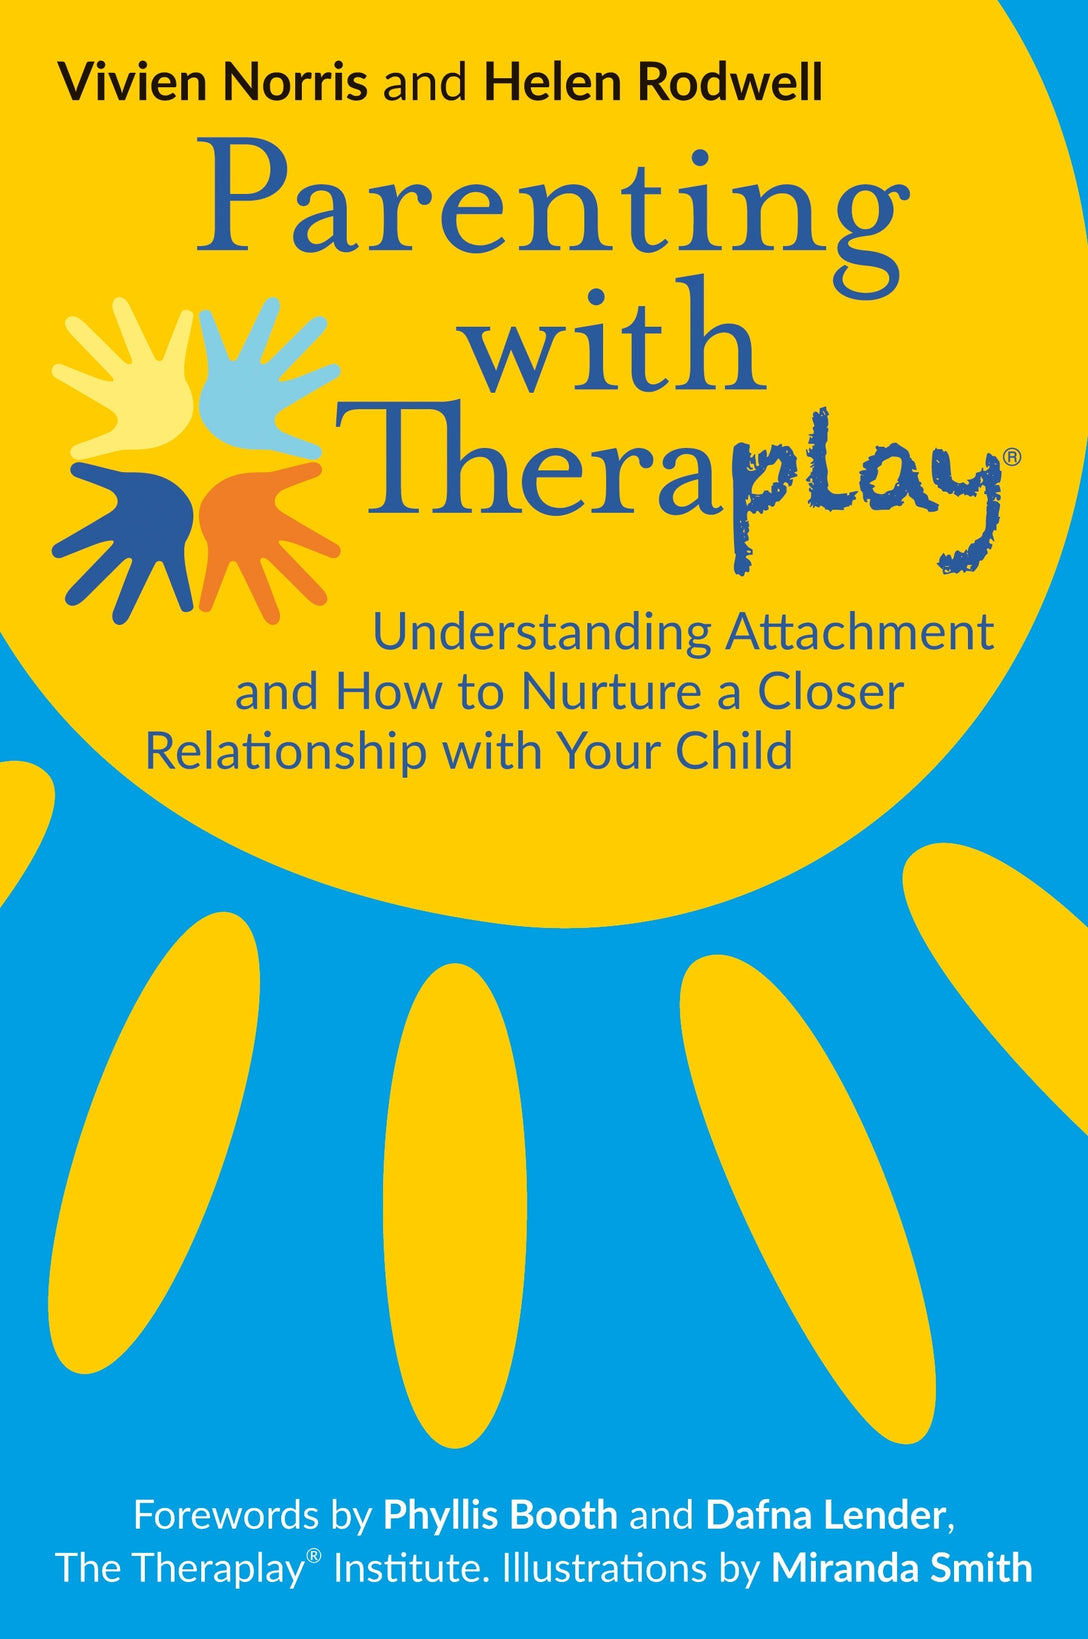 Parenting with Theraplay® by Phyllis Booth, Miranda Smith, Dafna Lender, Helen Rodwell, Vivien Norris